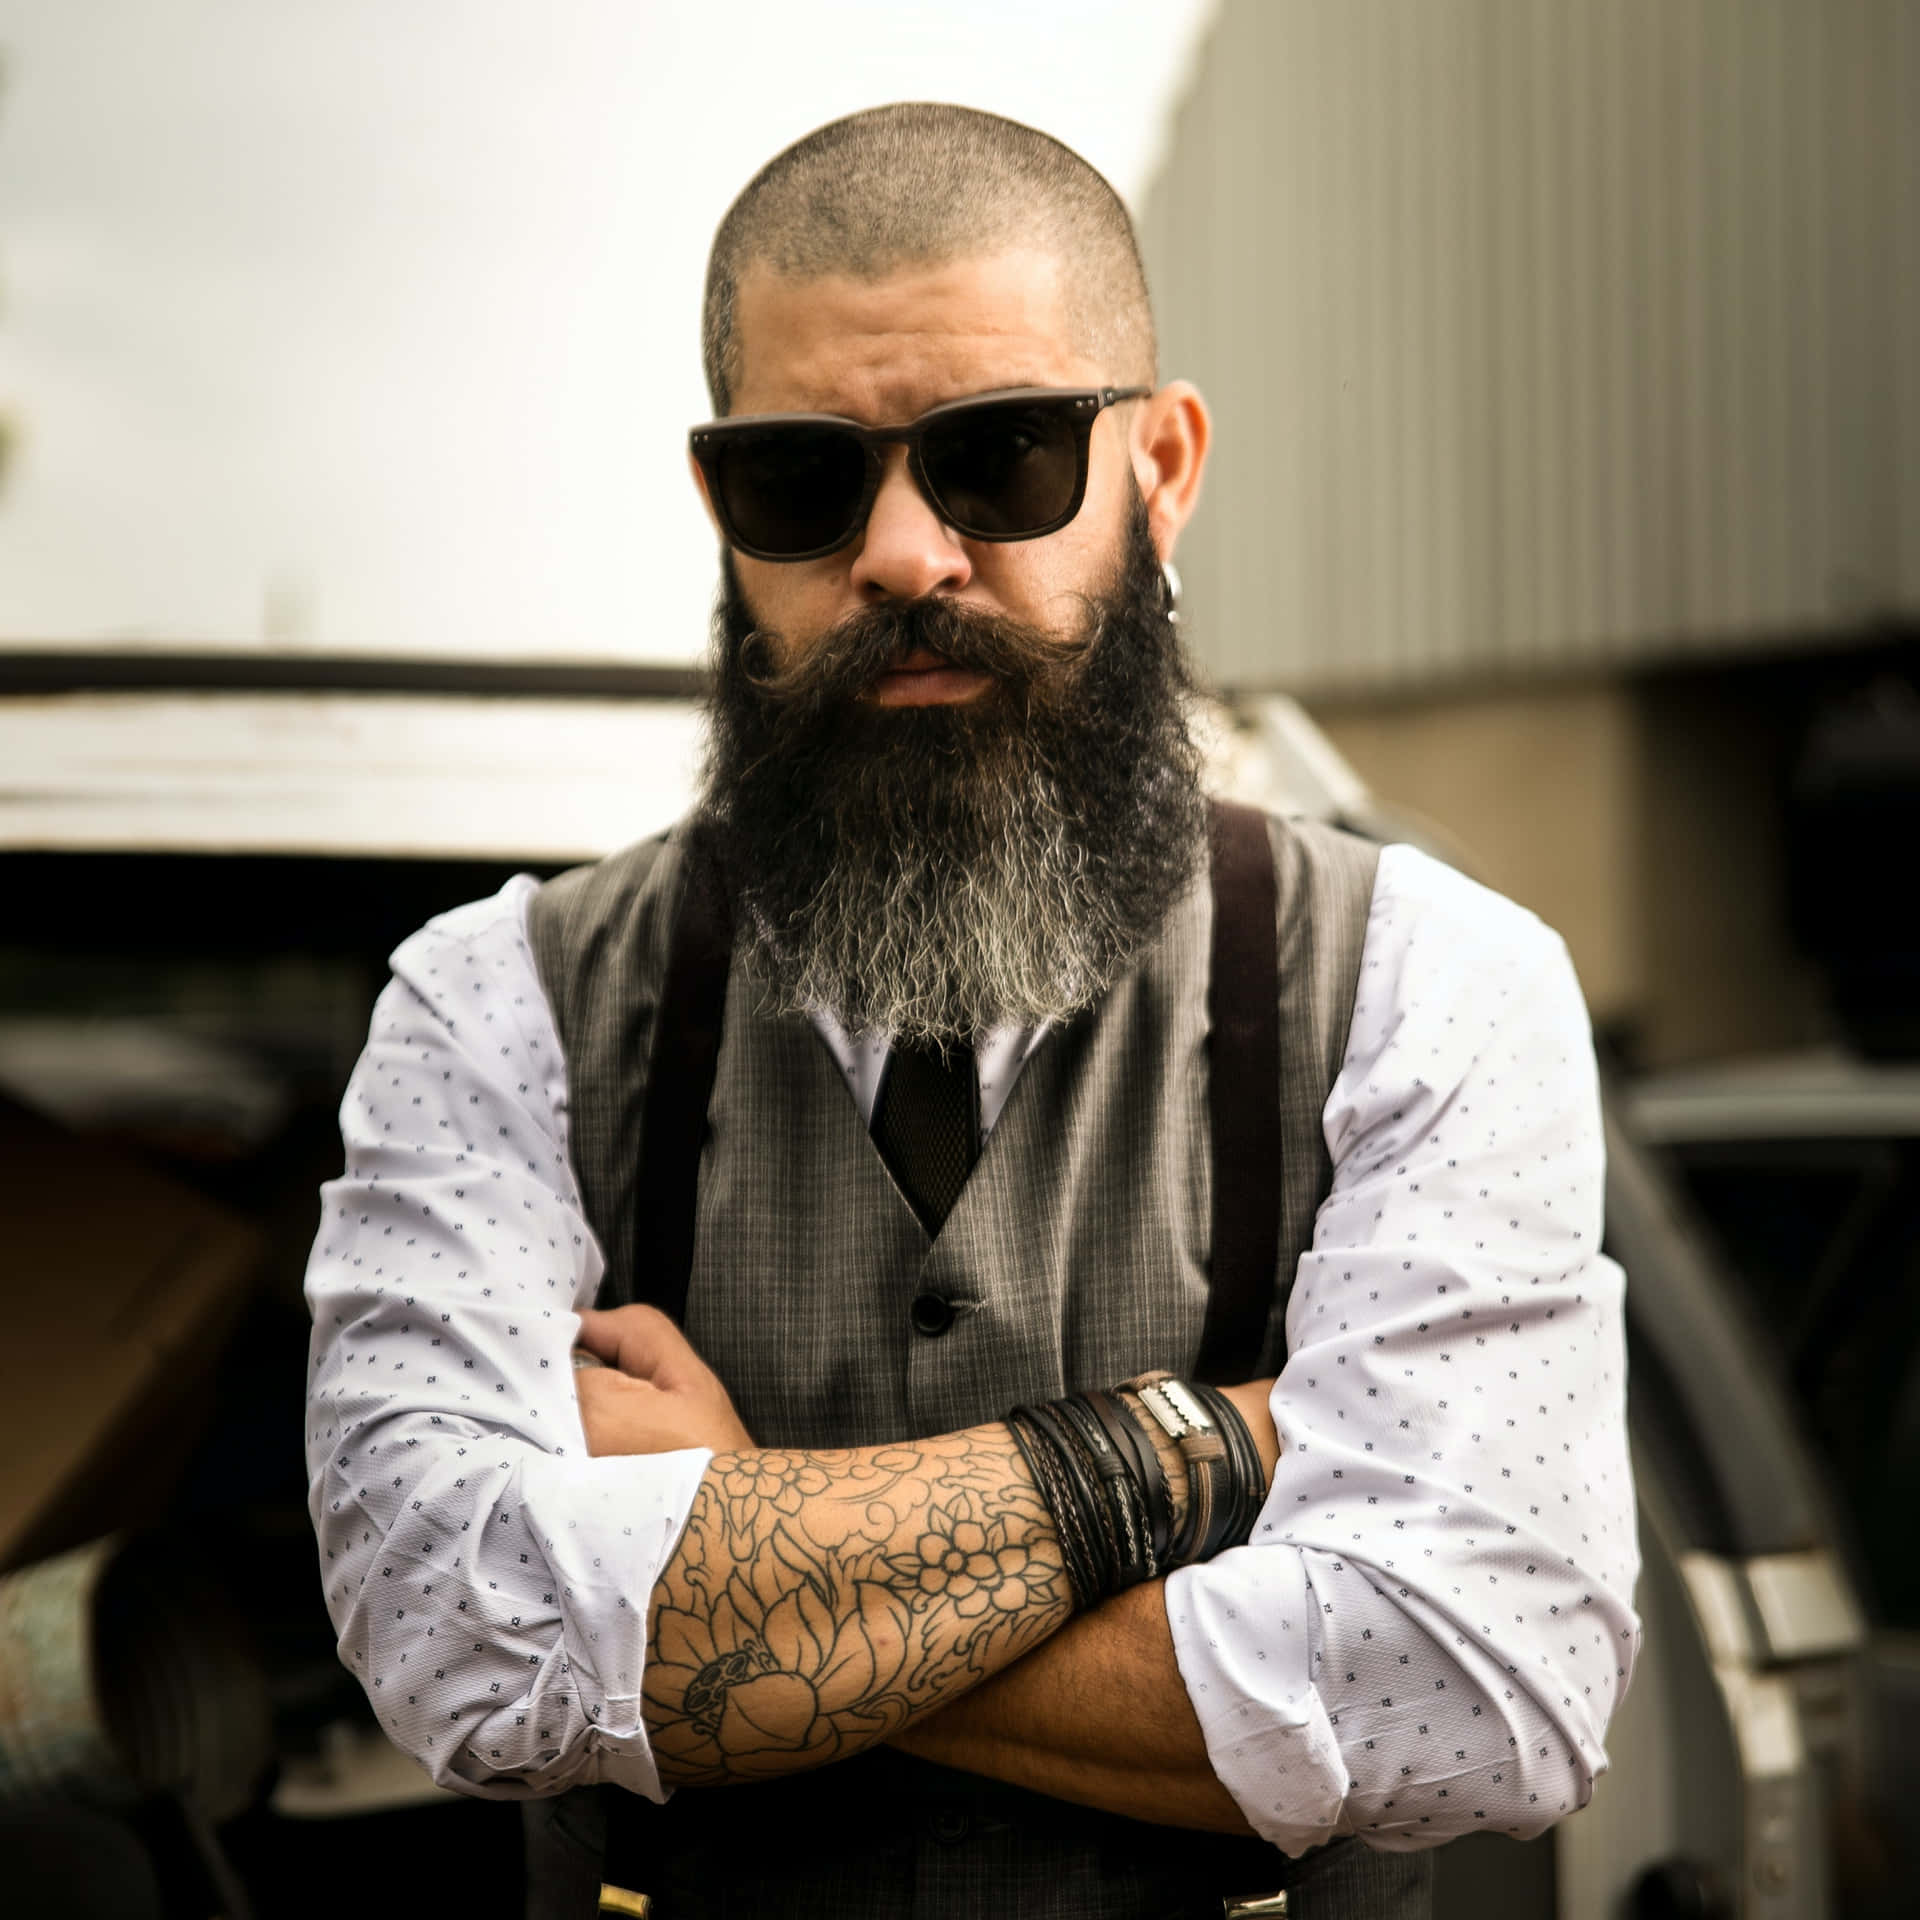 "Shape Your Beard and Style It to Perfection!"